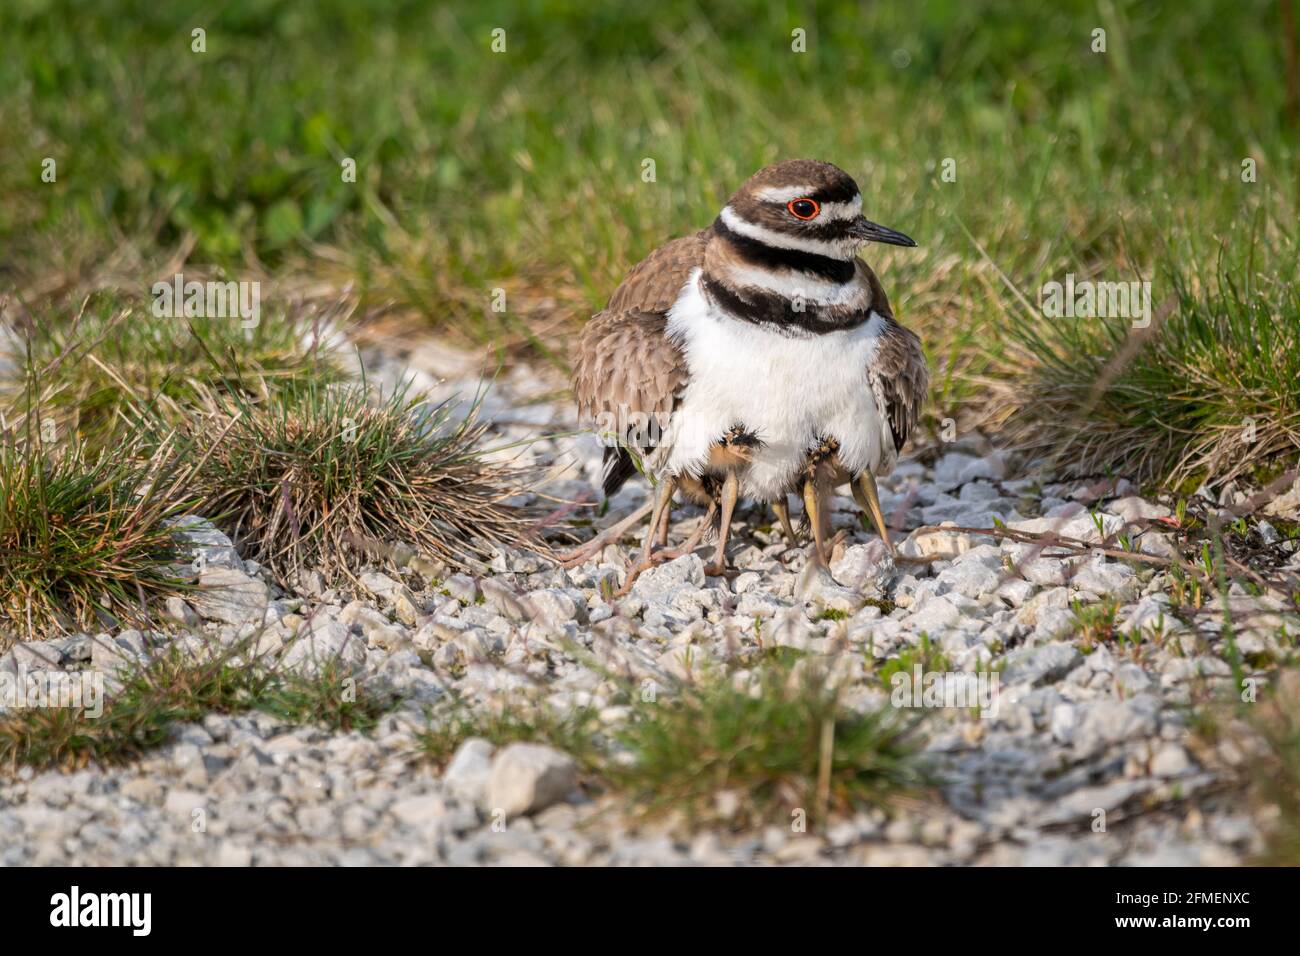 killdeer with young nesting for warmth Stock Photo